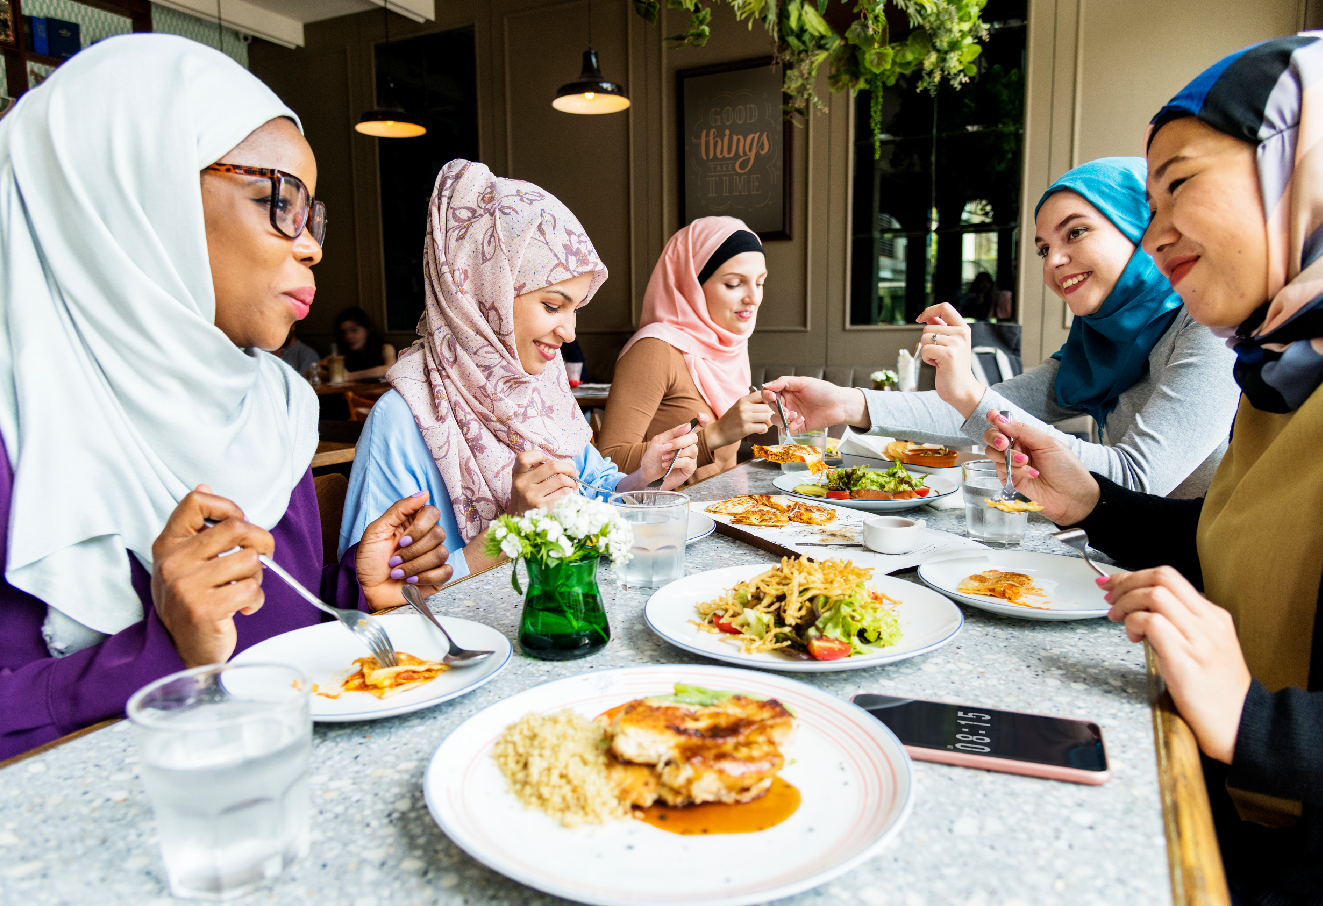 A group of Muslim women are having lunch together.